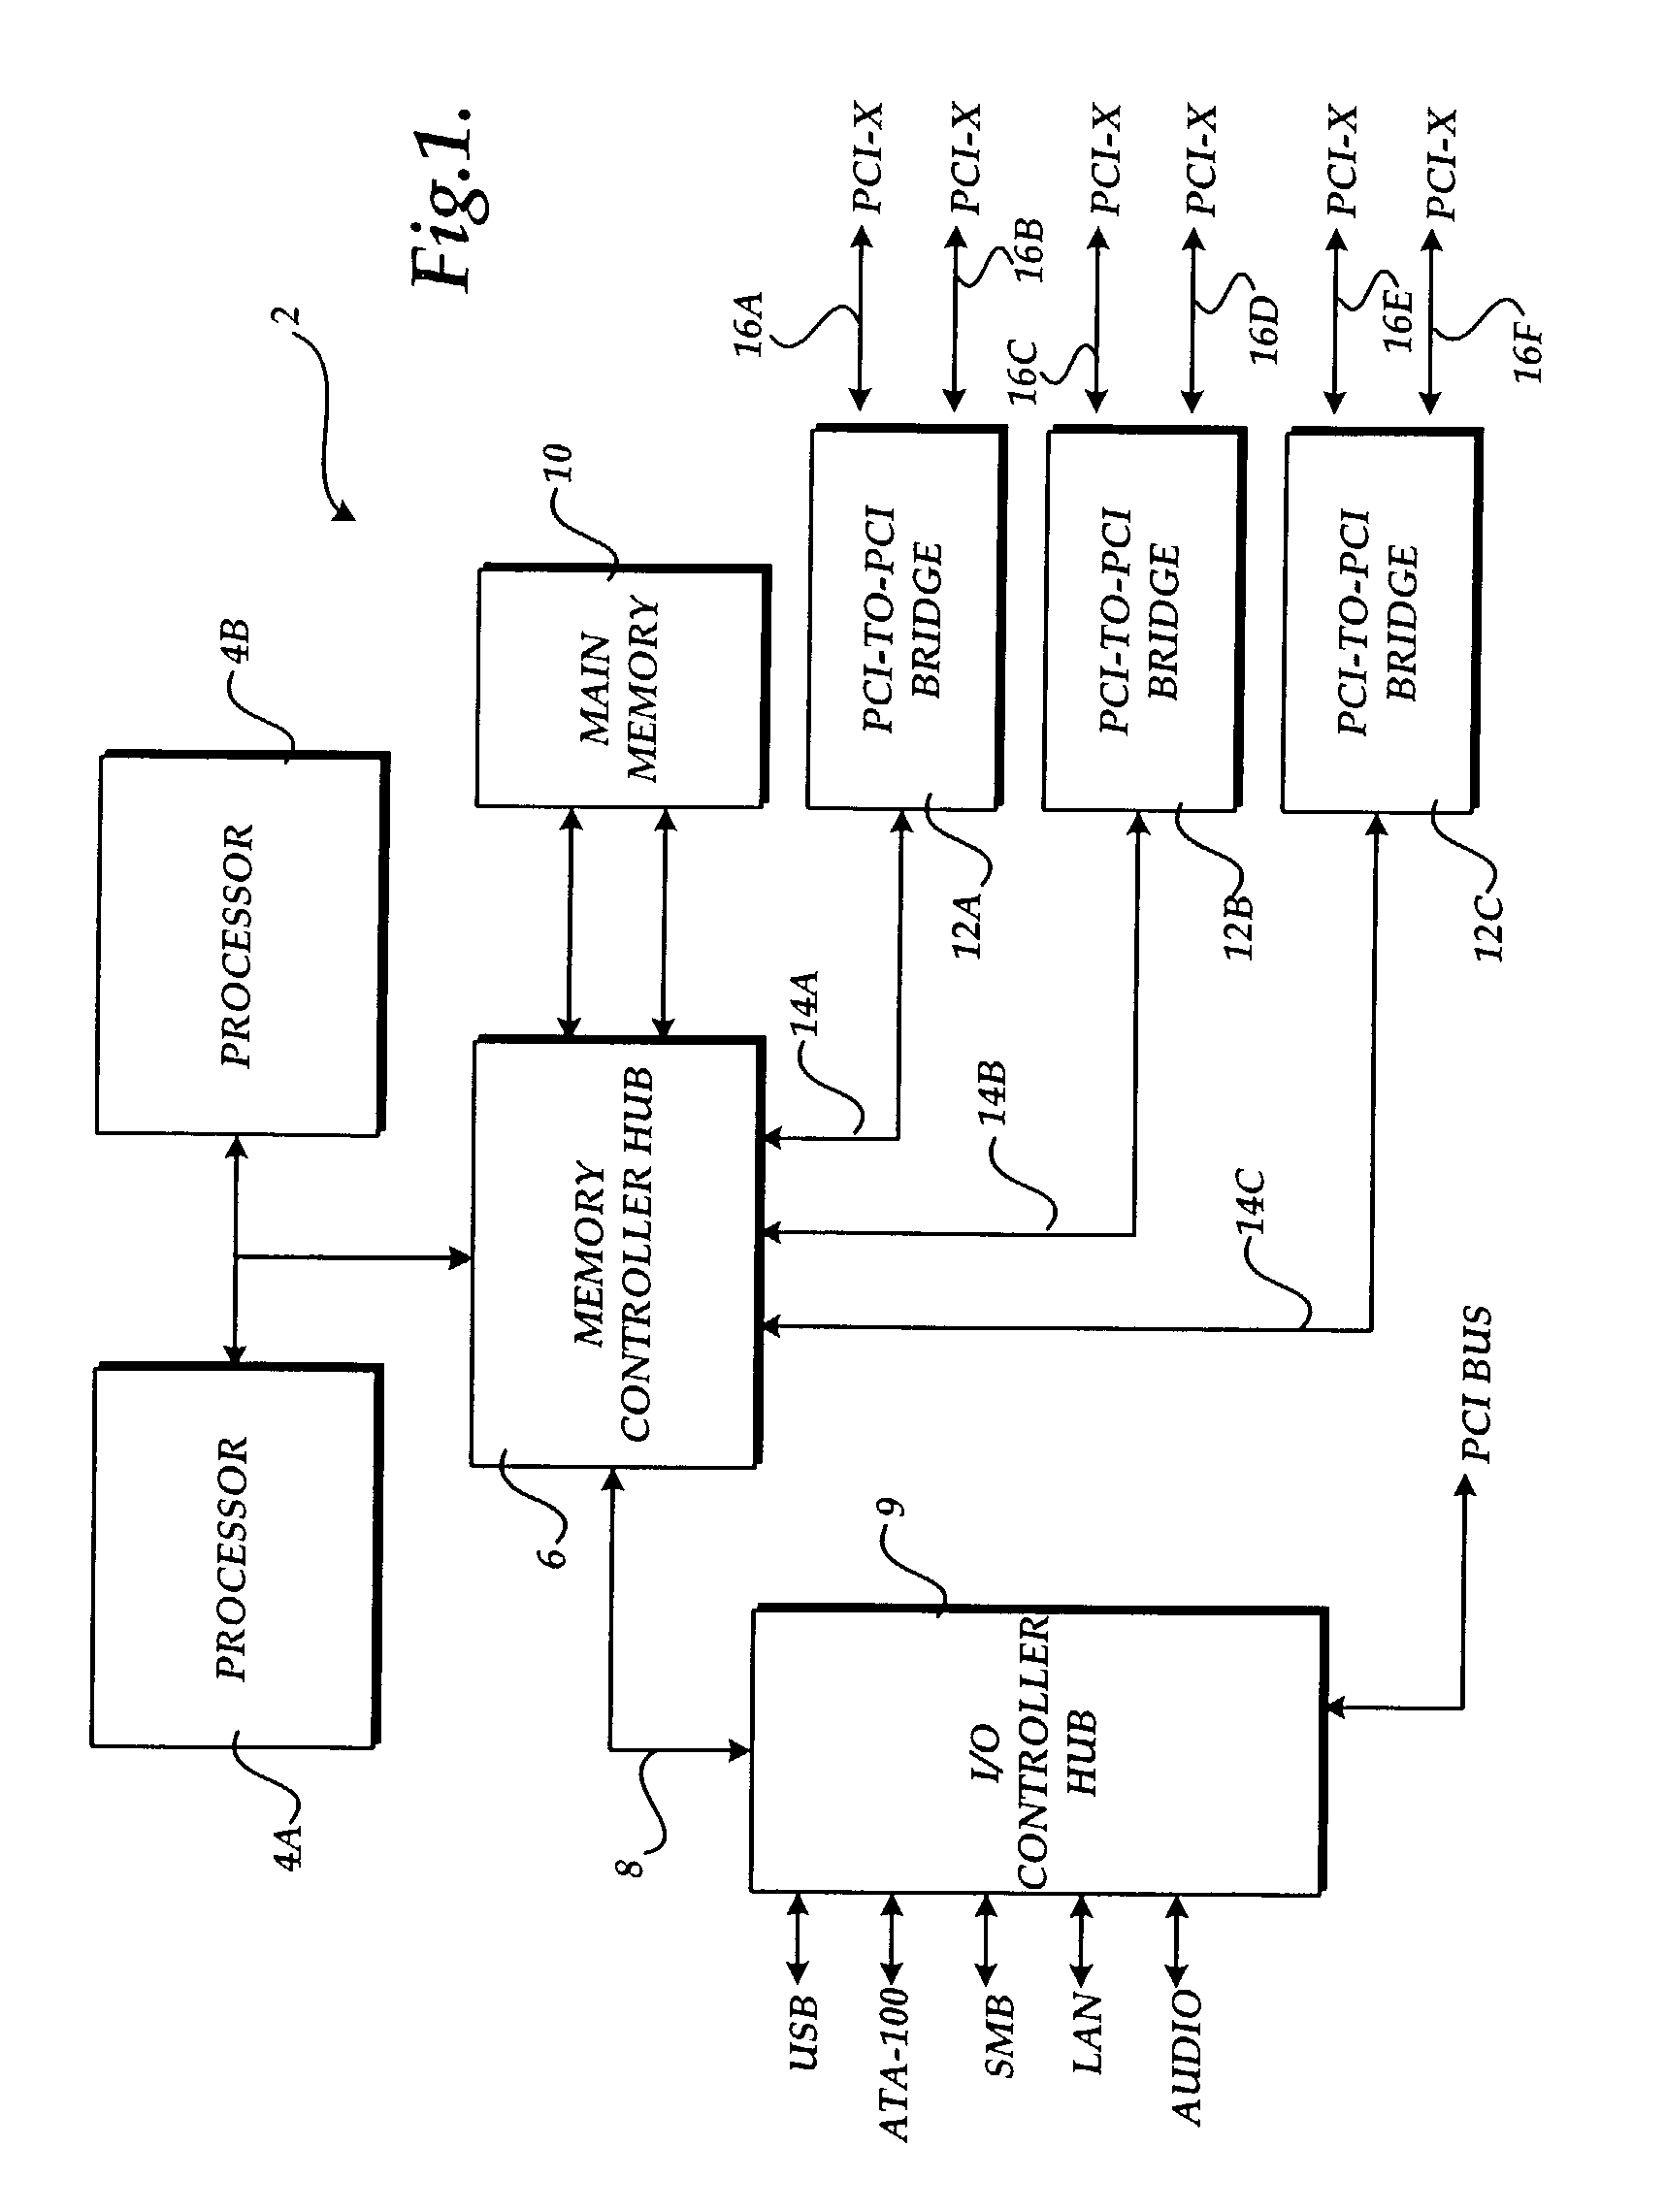 Method, system, and apparatus for eliminating bus renumbering in a computer system